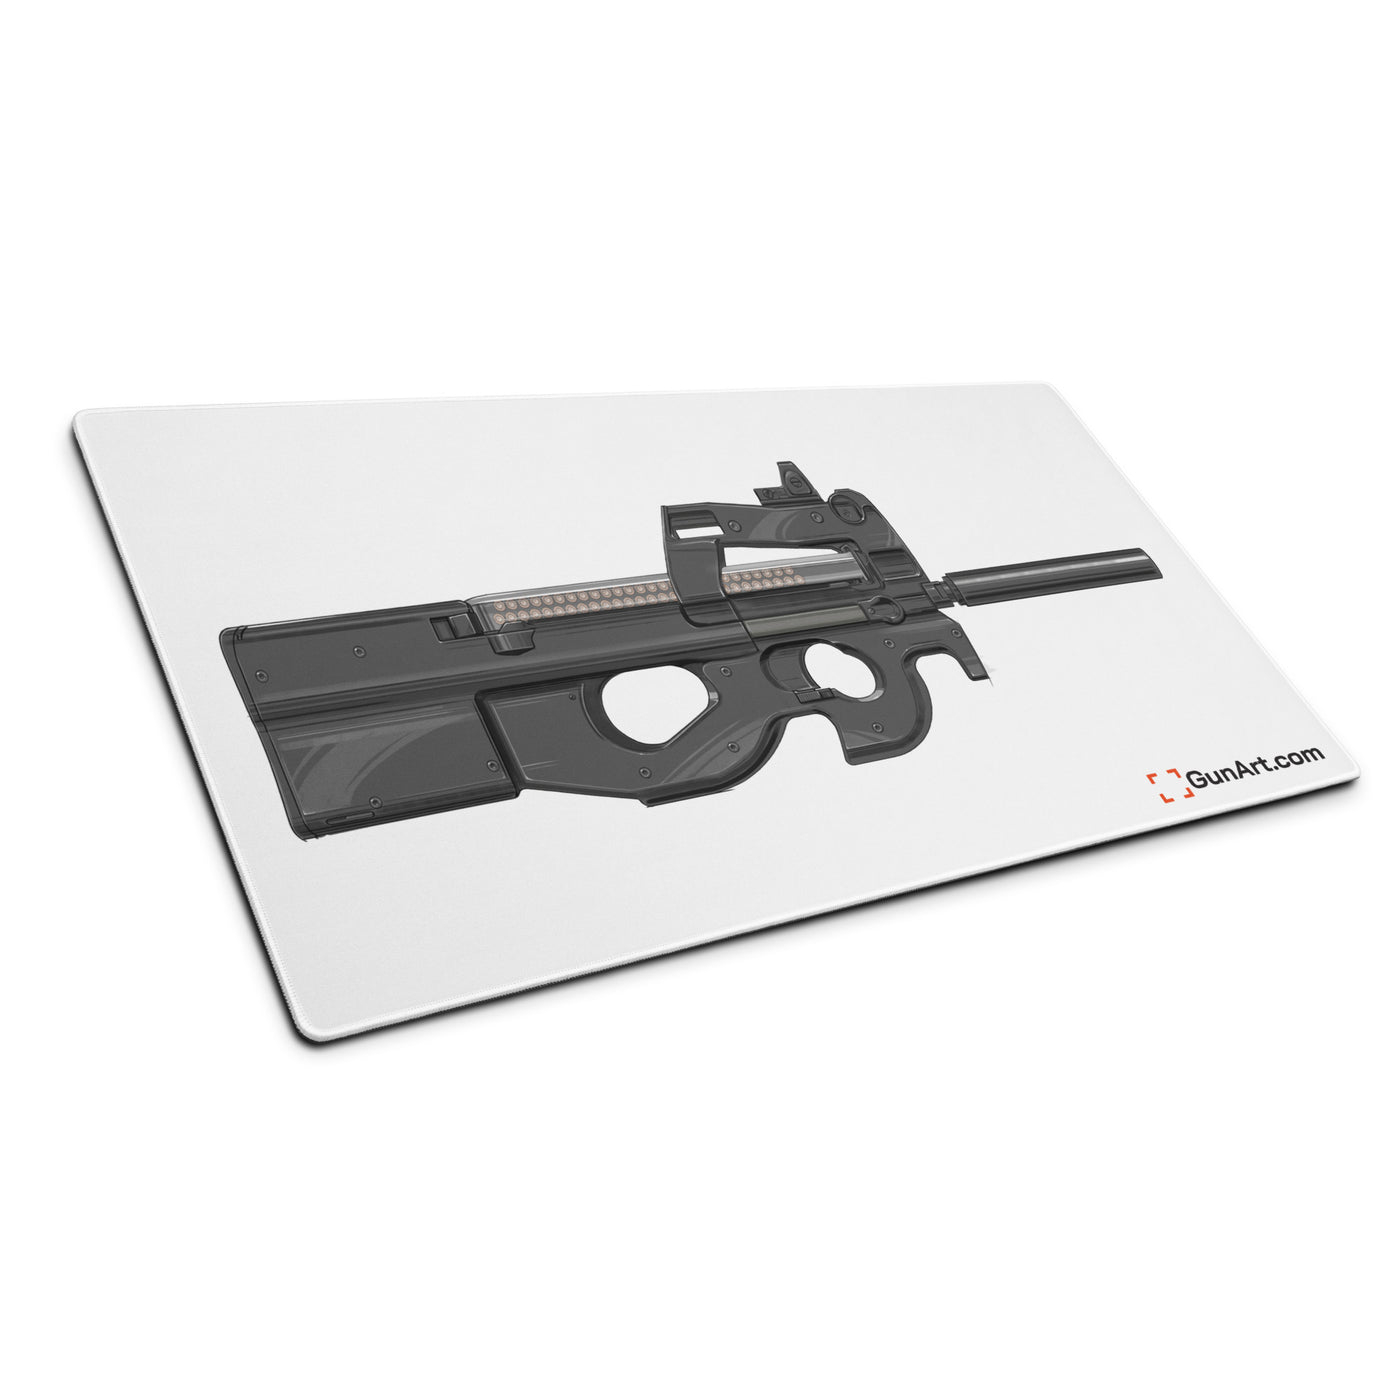 Secret Service Bullpup 5.7x28mm Subgun Gaming Mouse Pad - Just The Piece - White Background